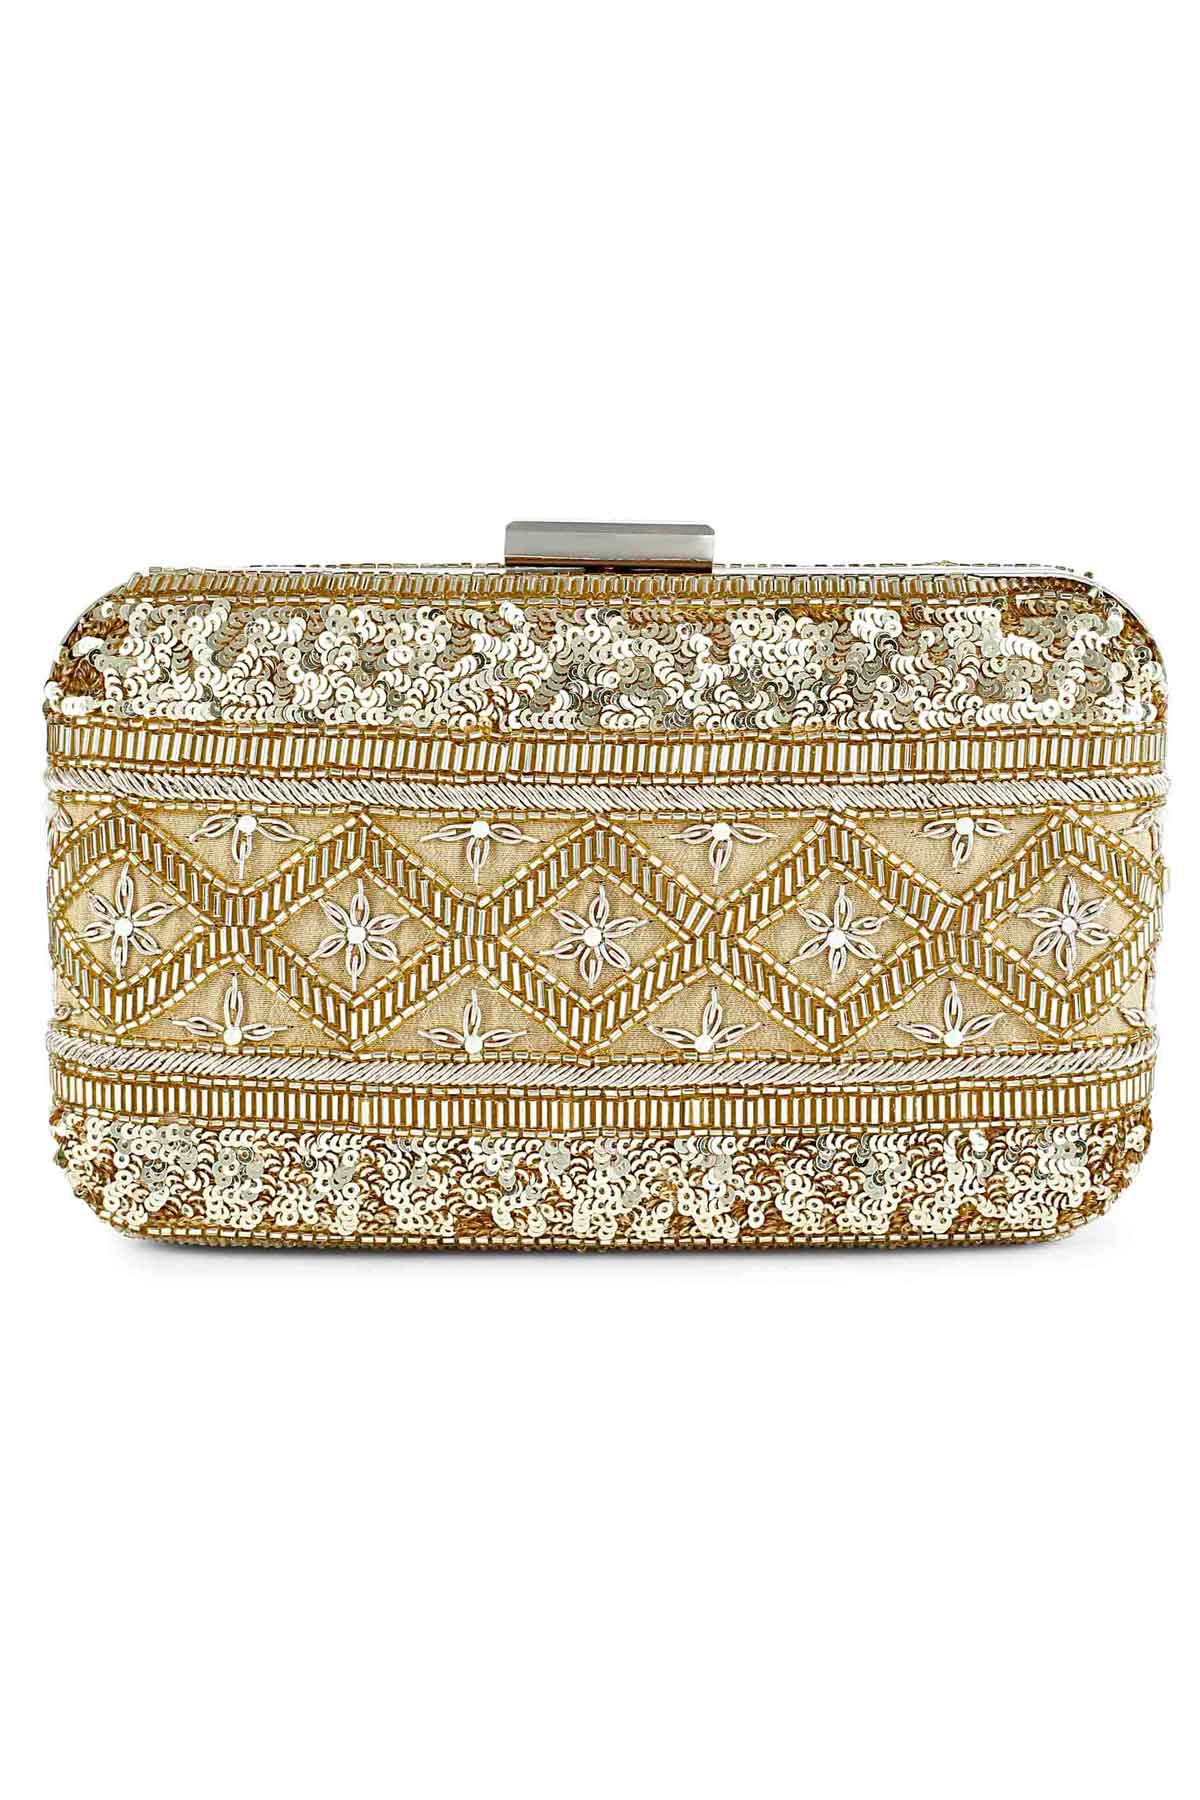 Sequins Embroidered Clutch